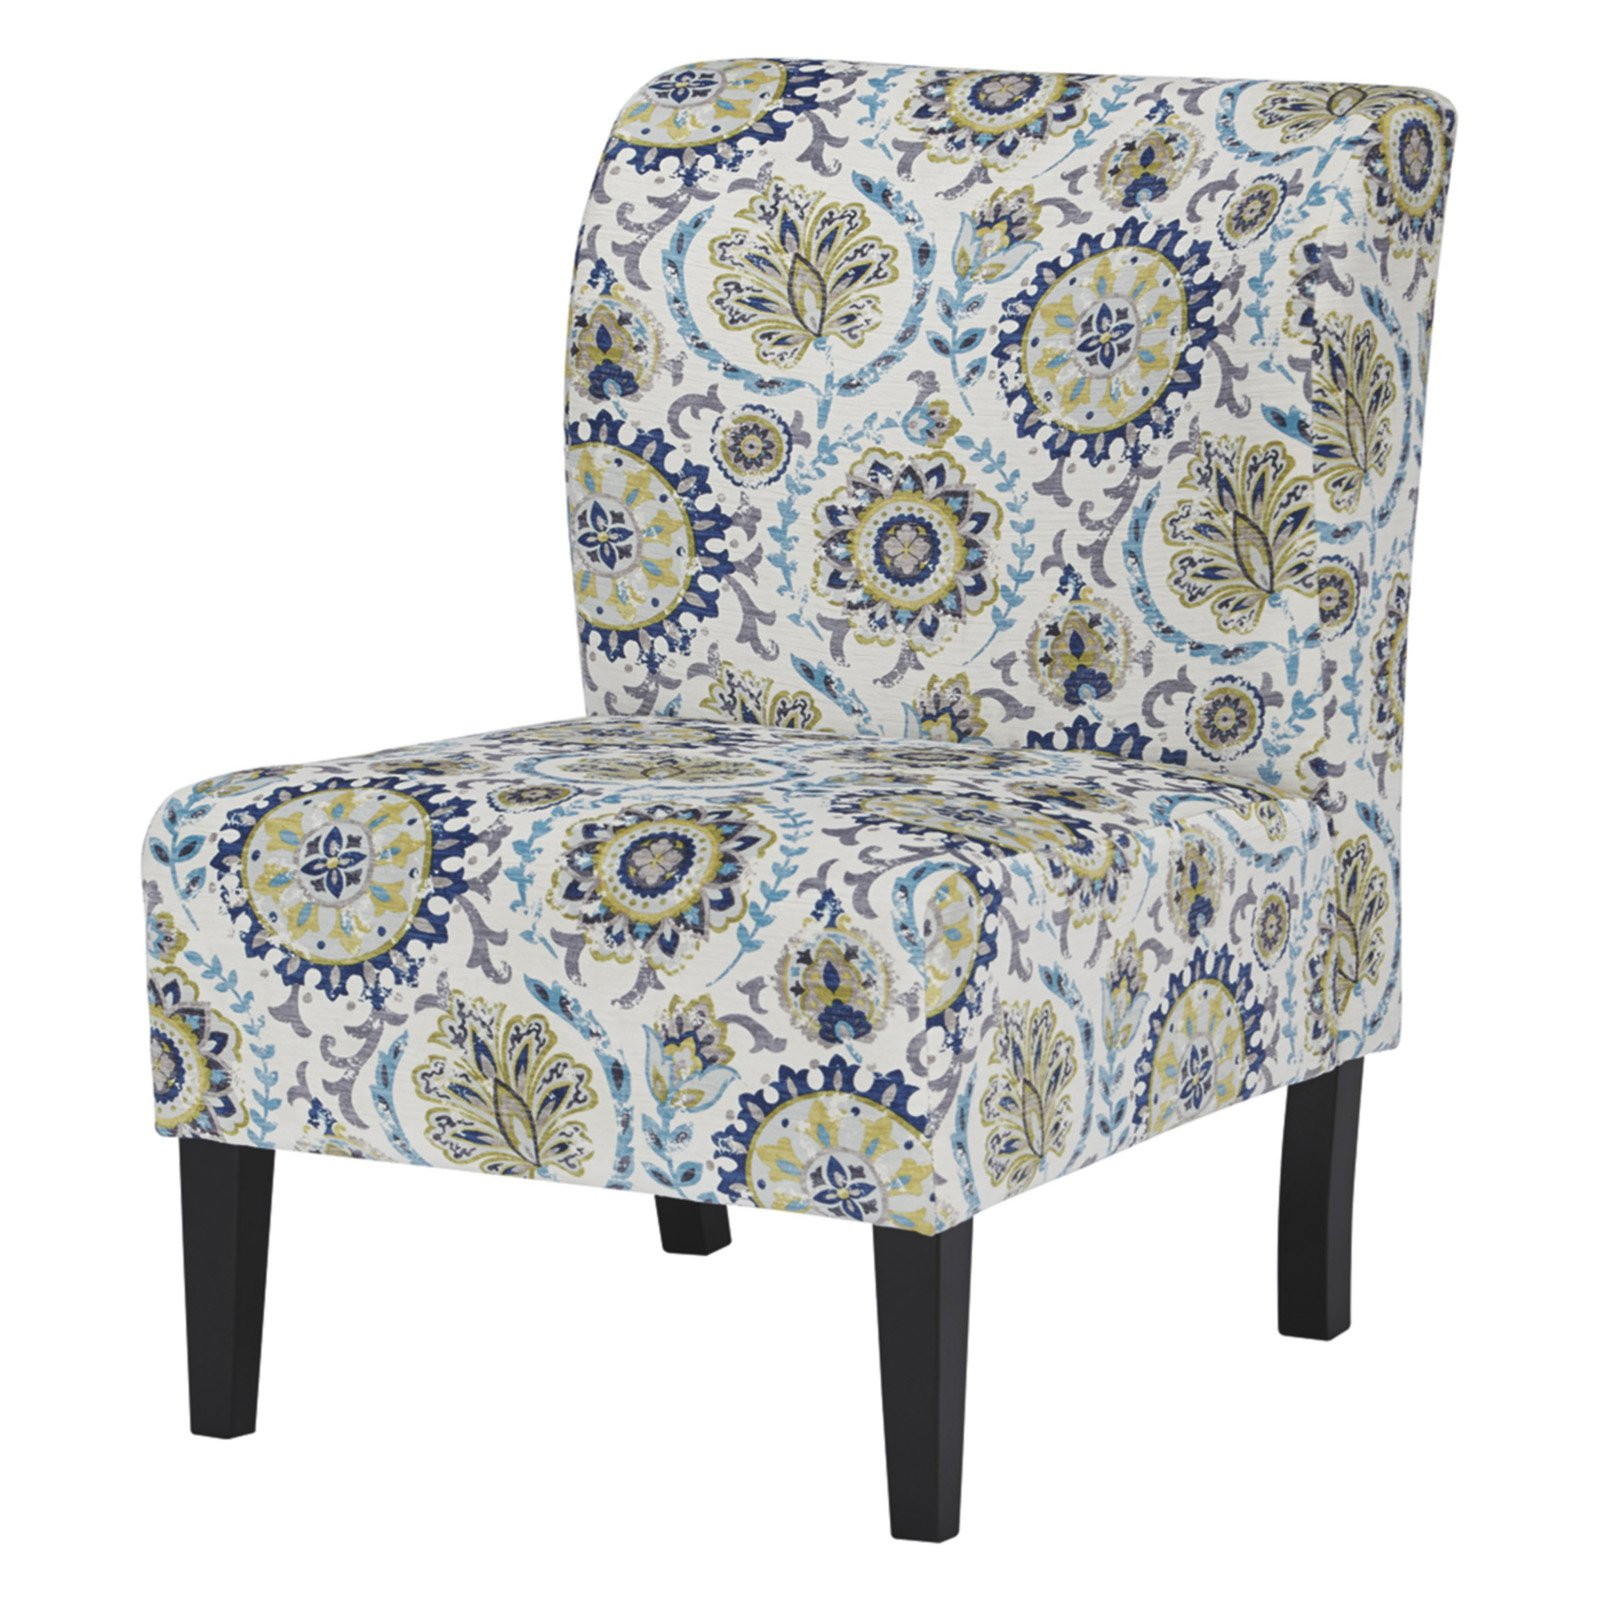 Printed Living Room Chairs
 Signature Design by Ashley Triptis Floral Print Accent